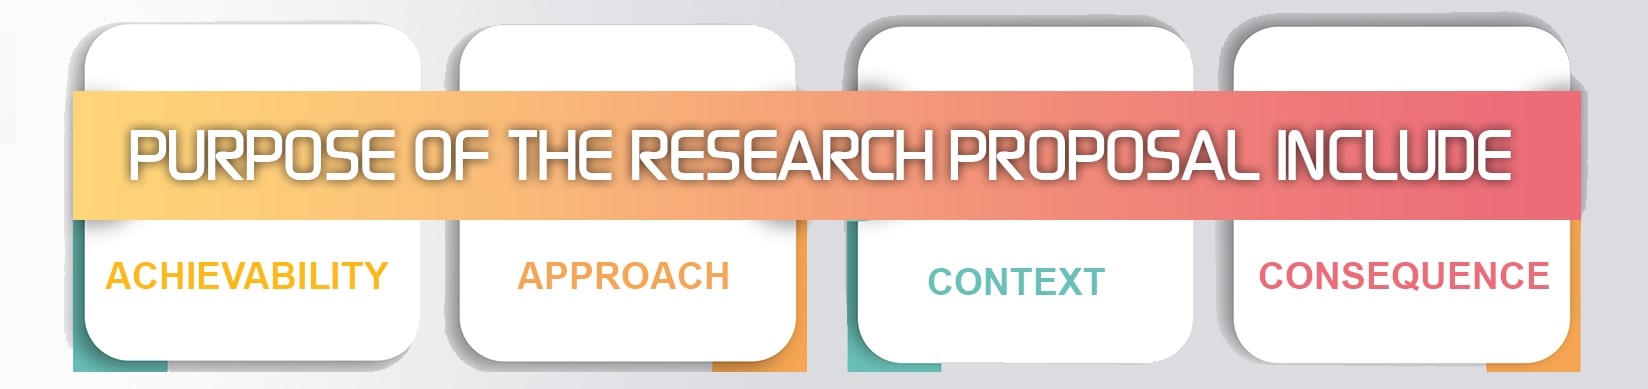 1 which statement describes the purpose of a research proposal